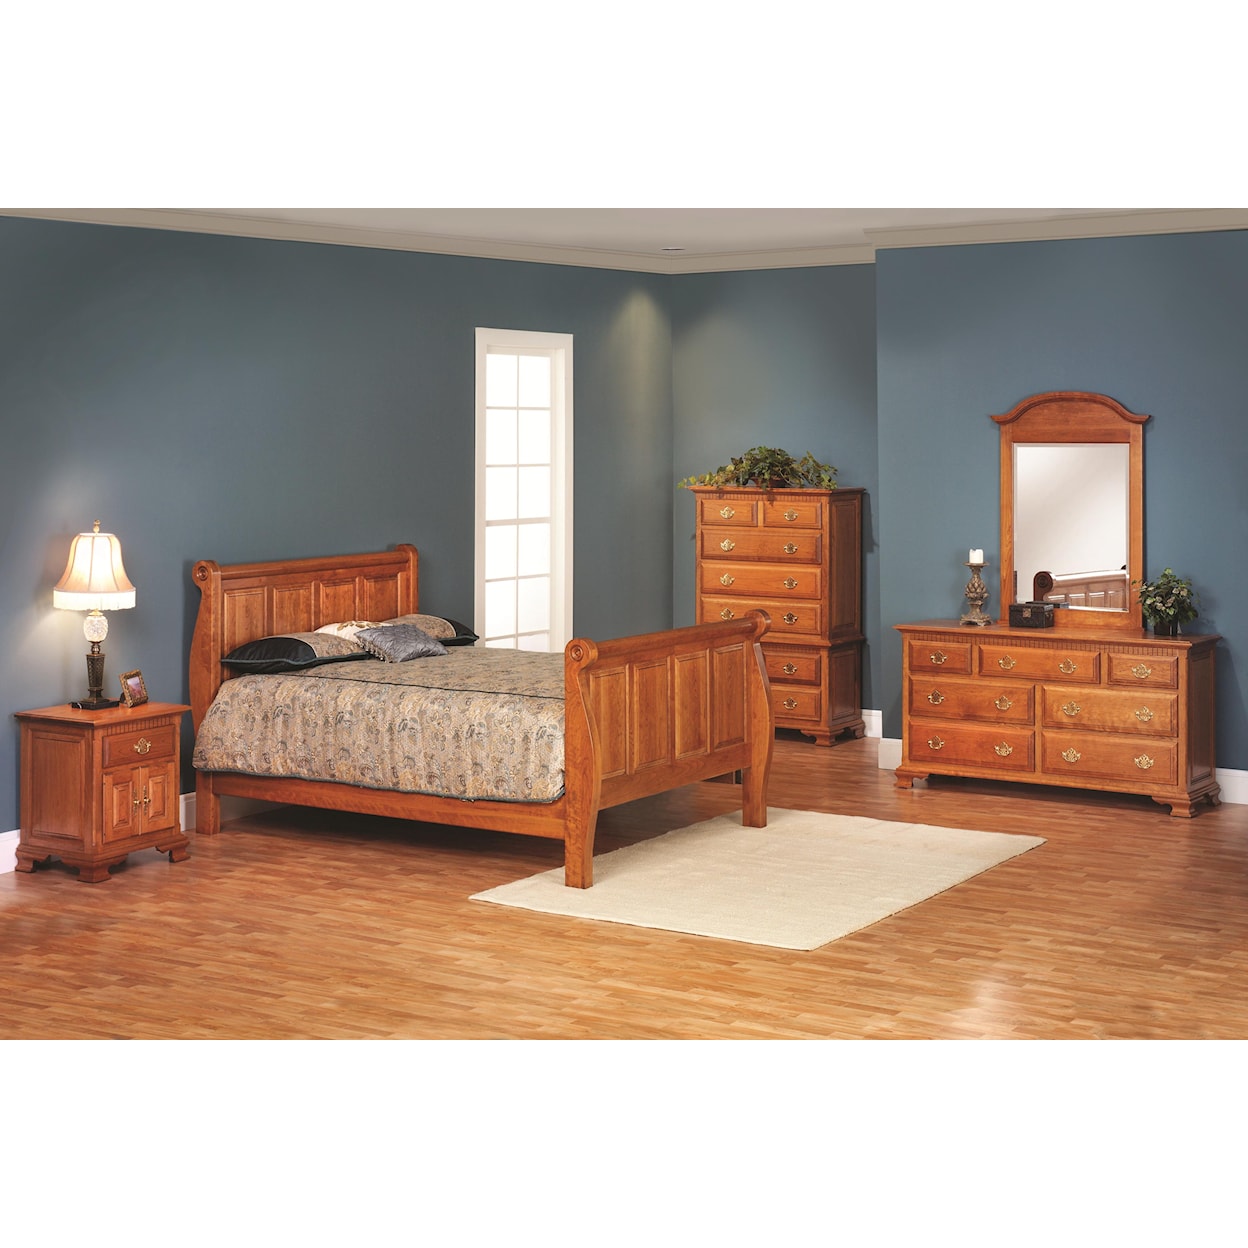 Millcraft Victorias Tradition Full Sleigh Bed